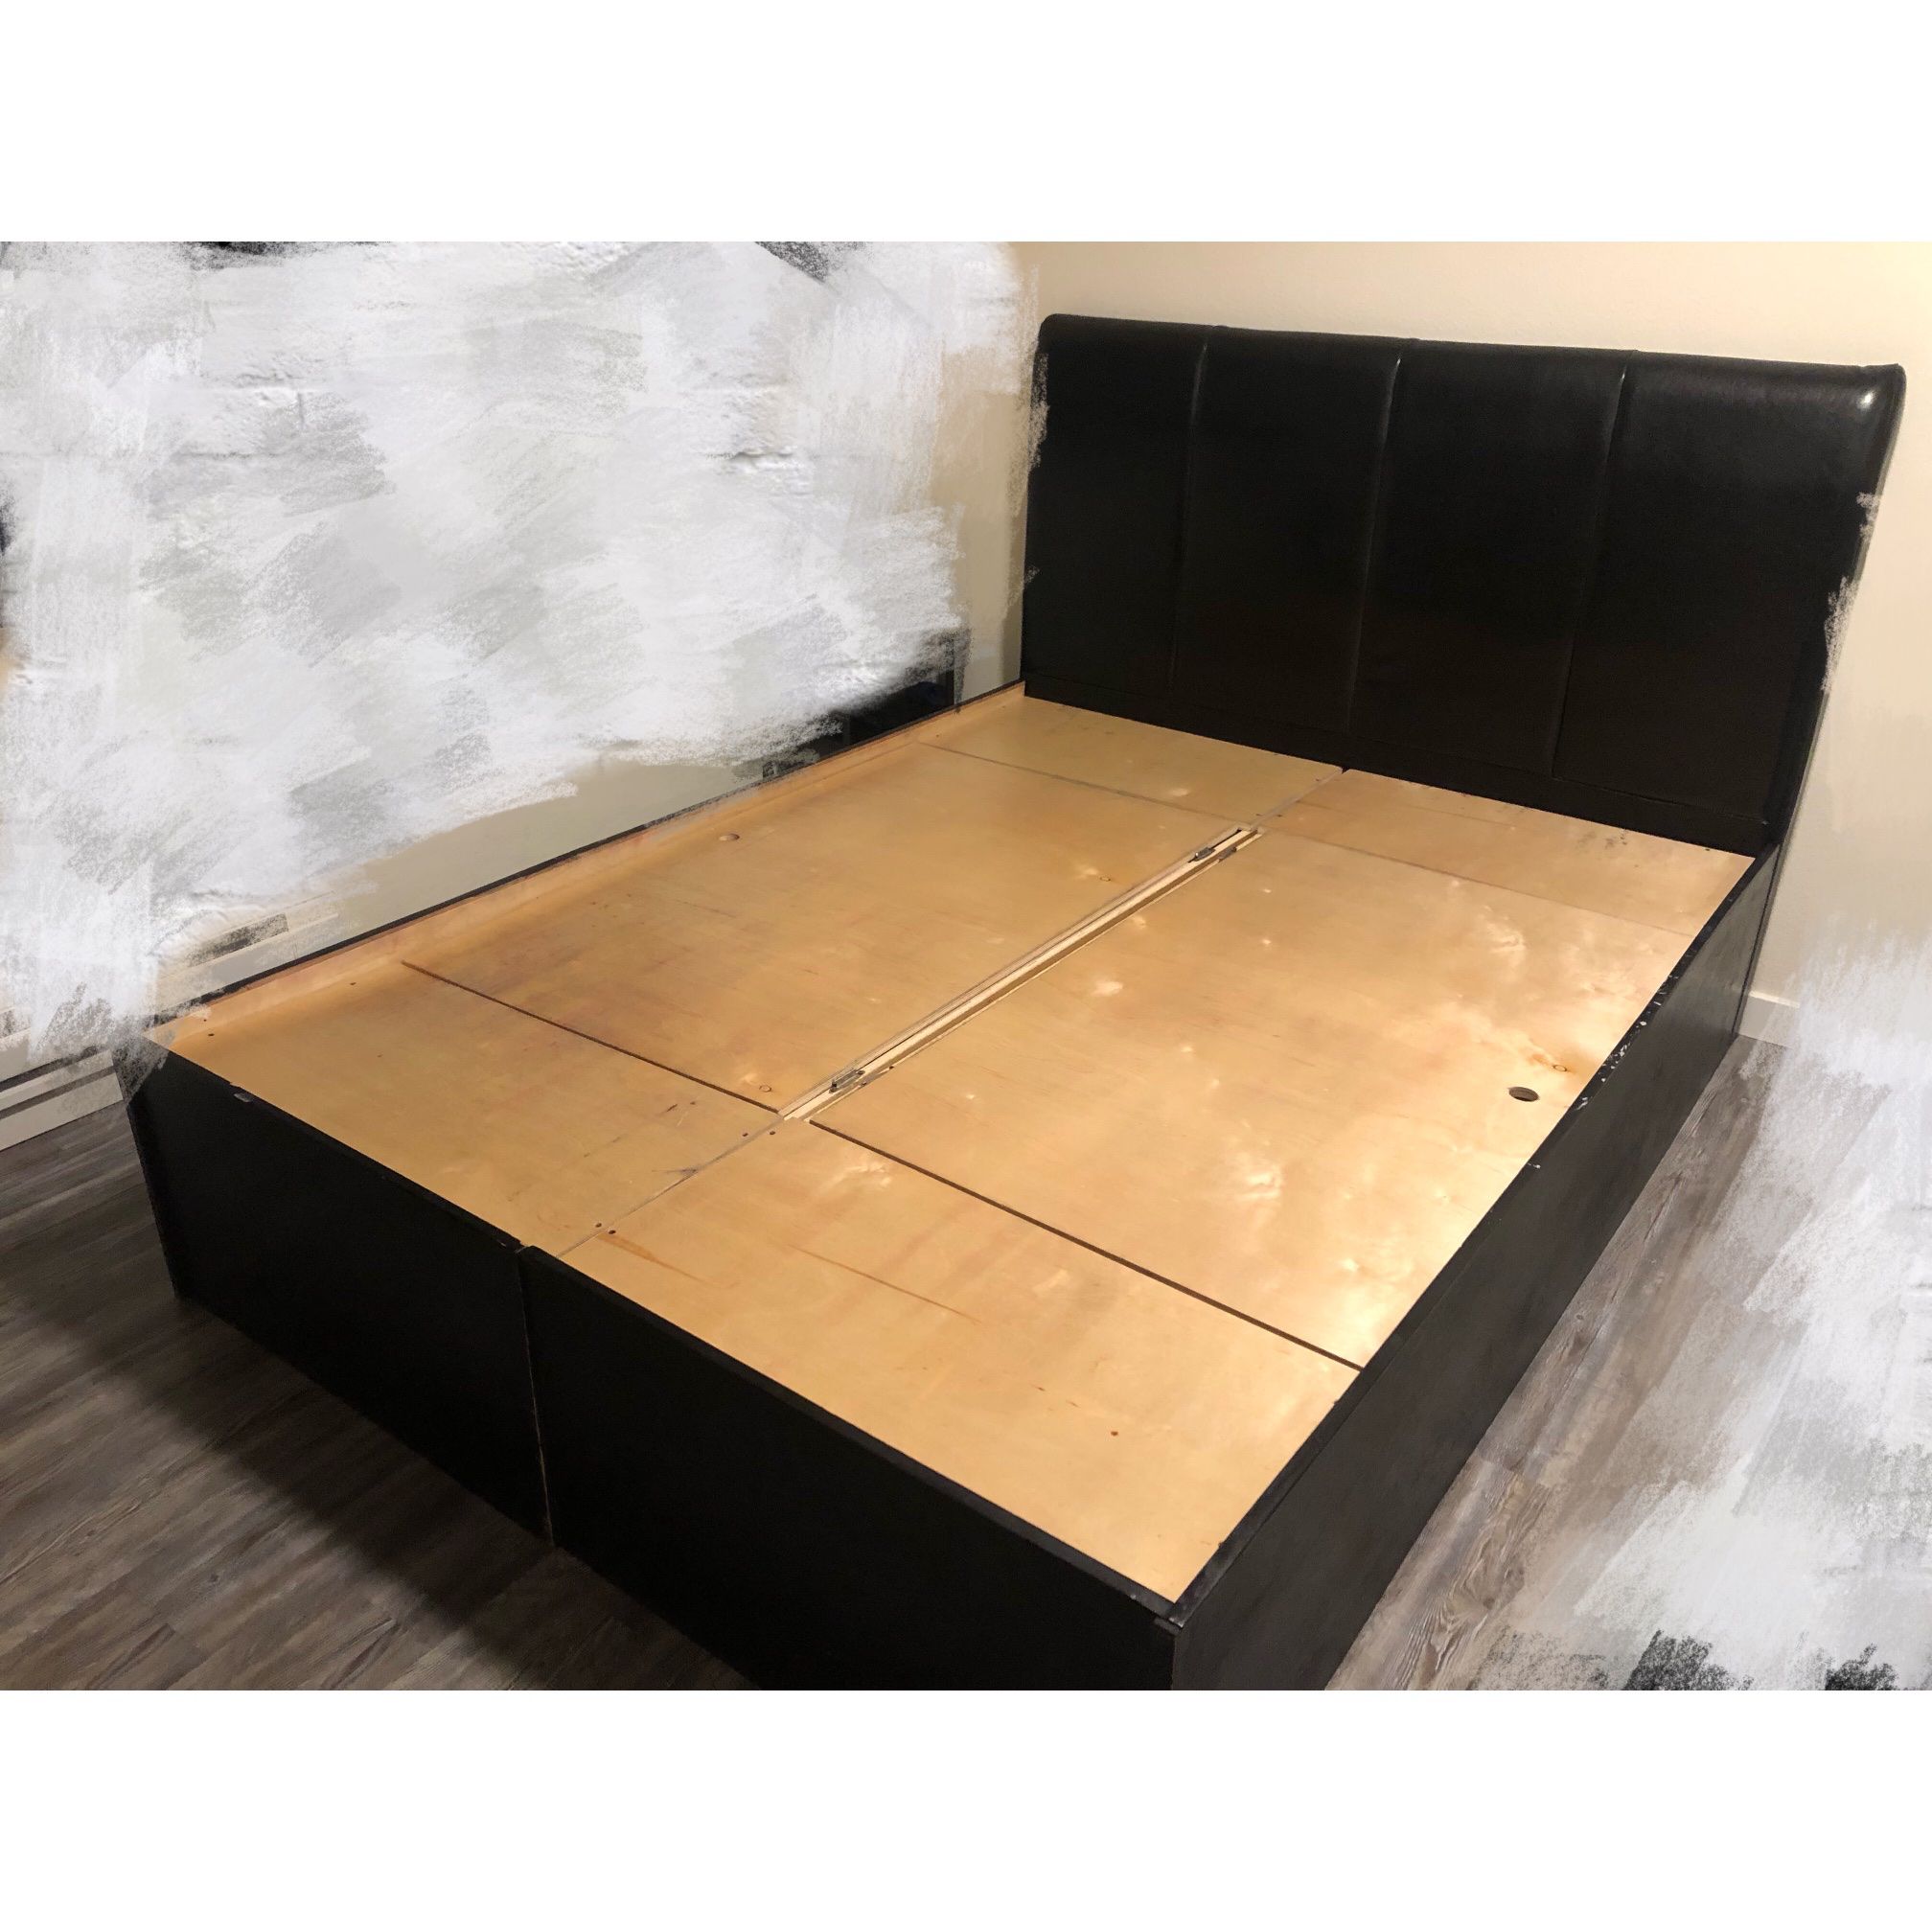 Free Queen Size Wooden Bed Frame Pick, Free Used Queen Size Bed Frame